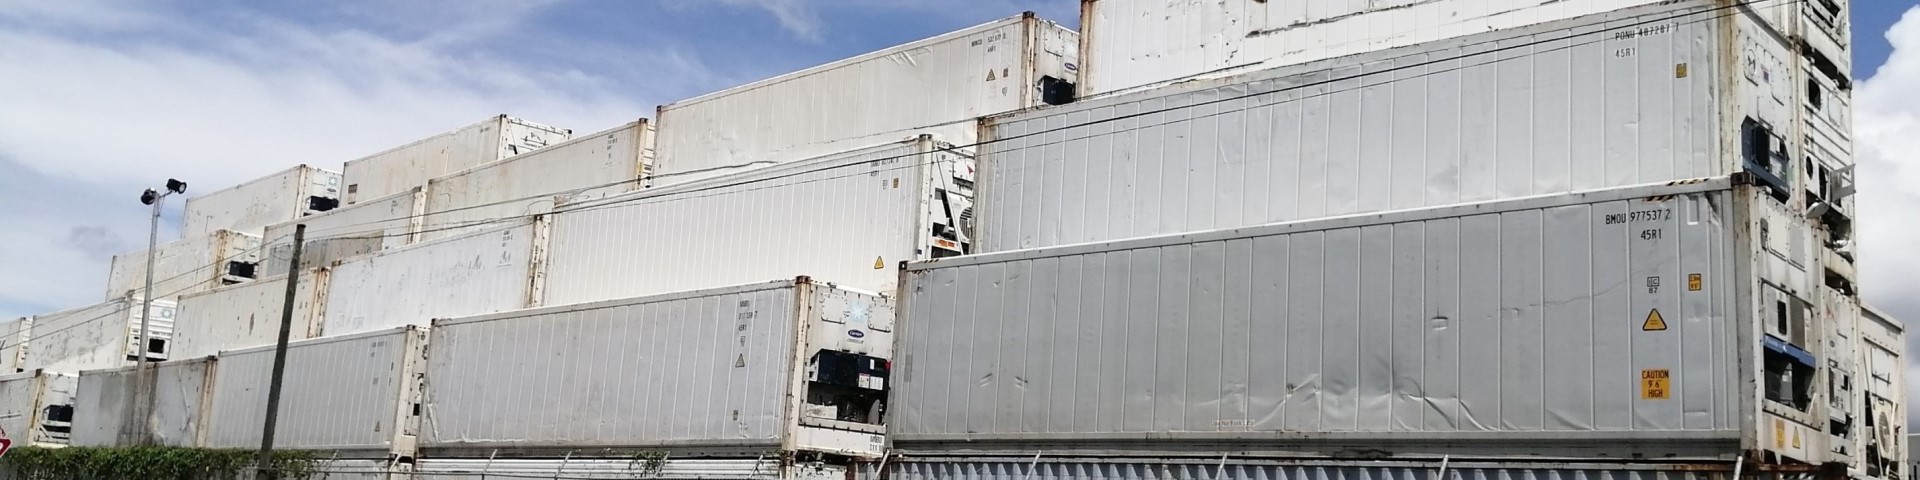 Several white cooling containers are stacked on top of each other.